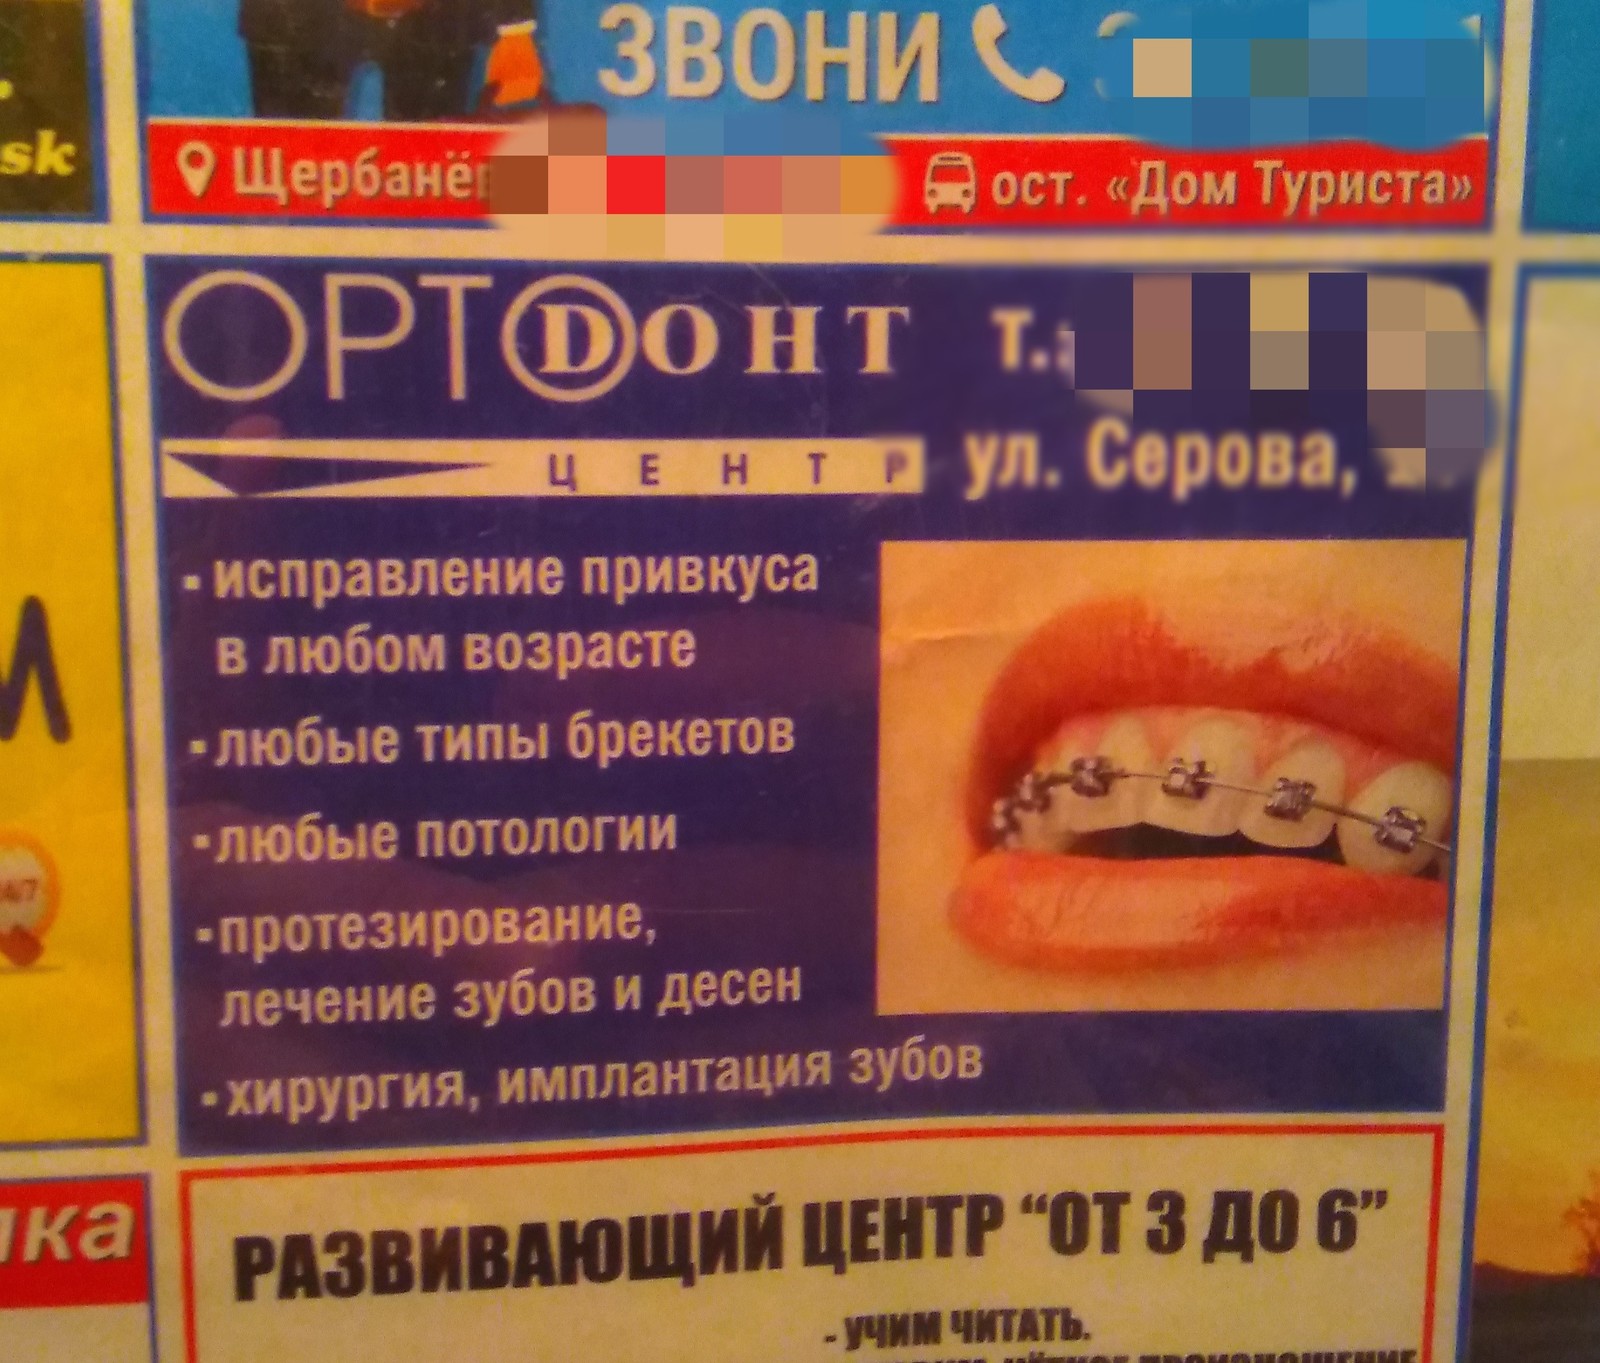 What about the aftertaste? - My, Advertising, The photo, Omsk, Dentistry